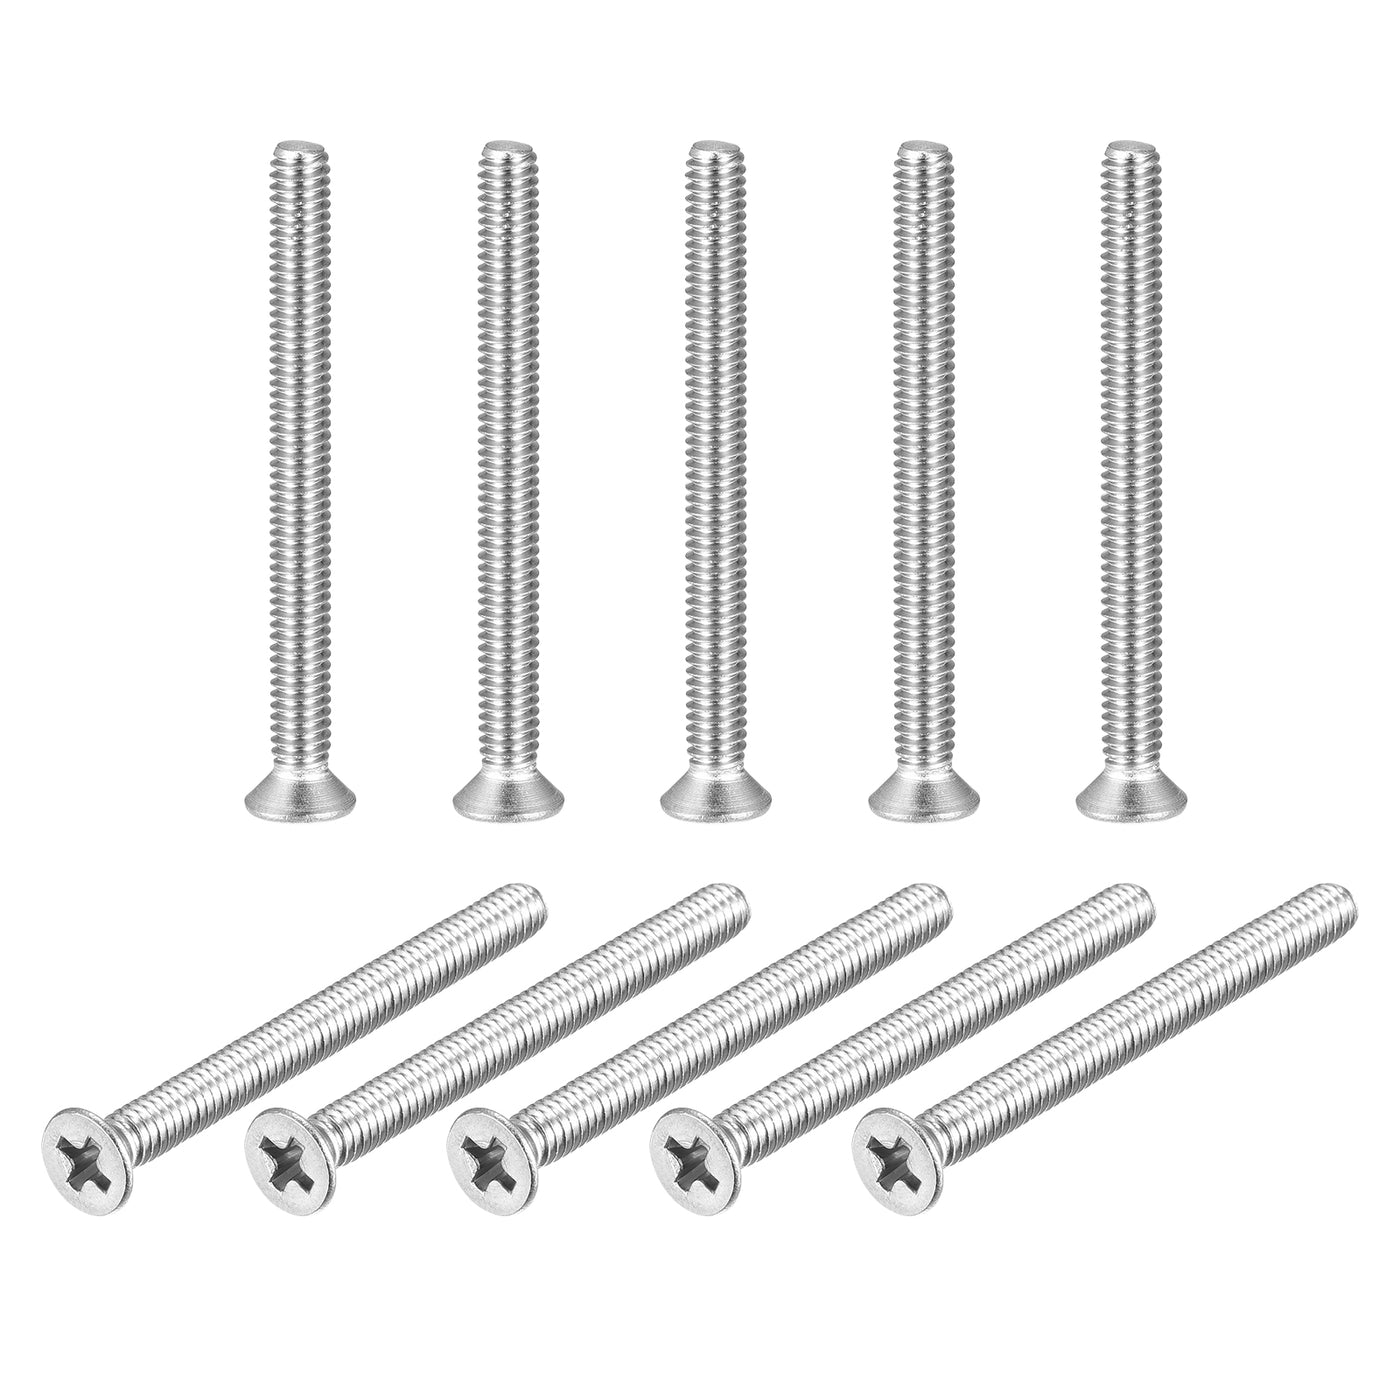 uxcell Uxcell 8#-32x1-3/4" Flat Head Machine Screws Phillips 304 Stainless Steel Bolts 25pcs